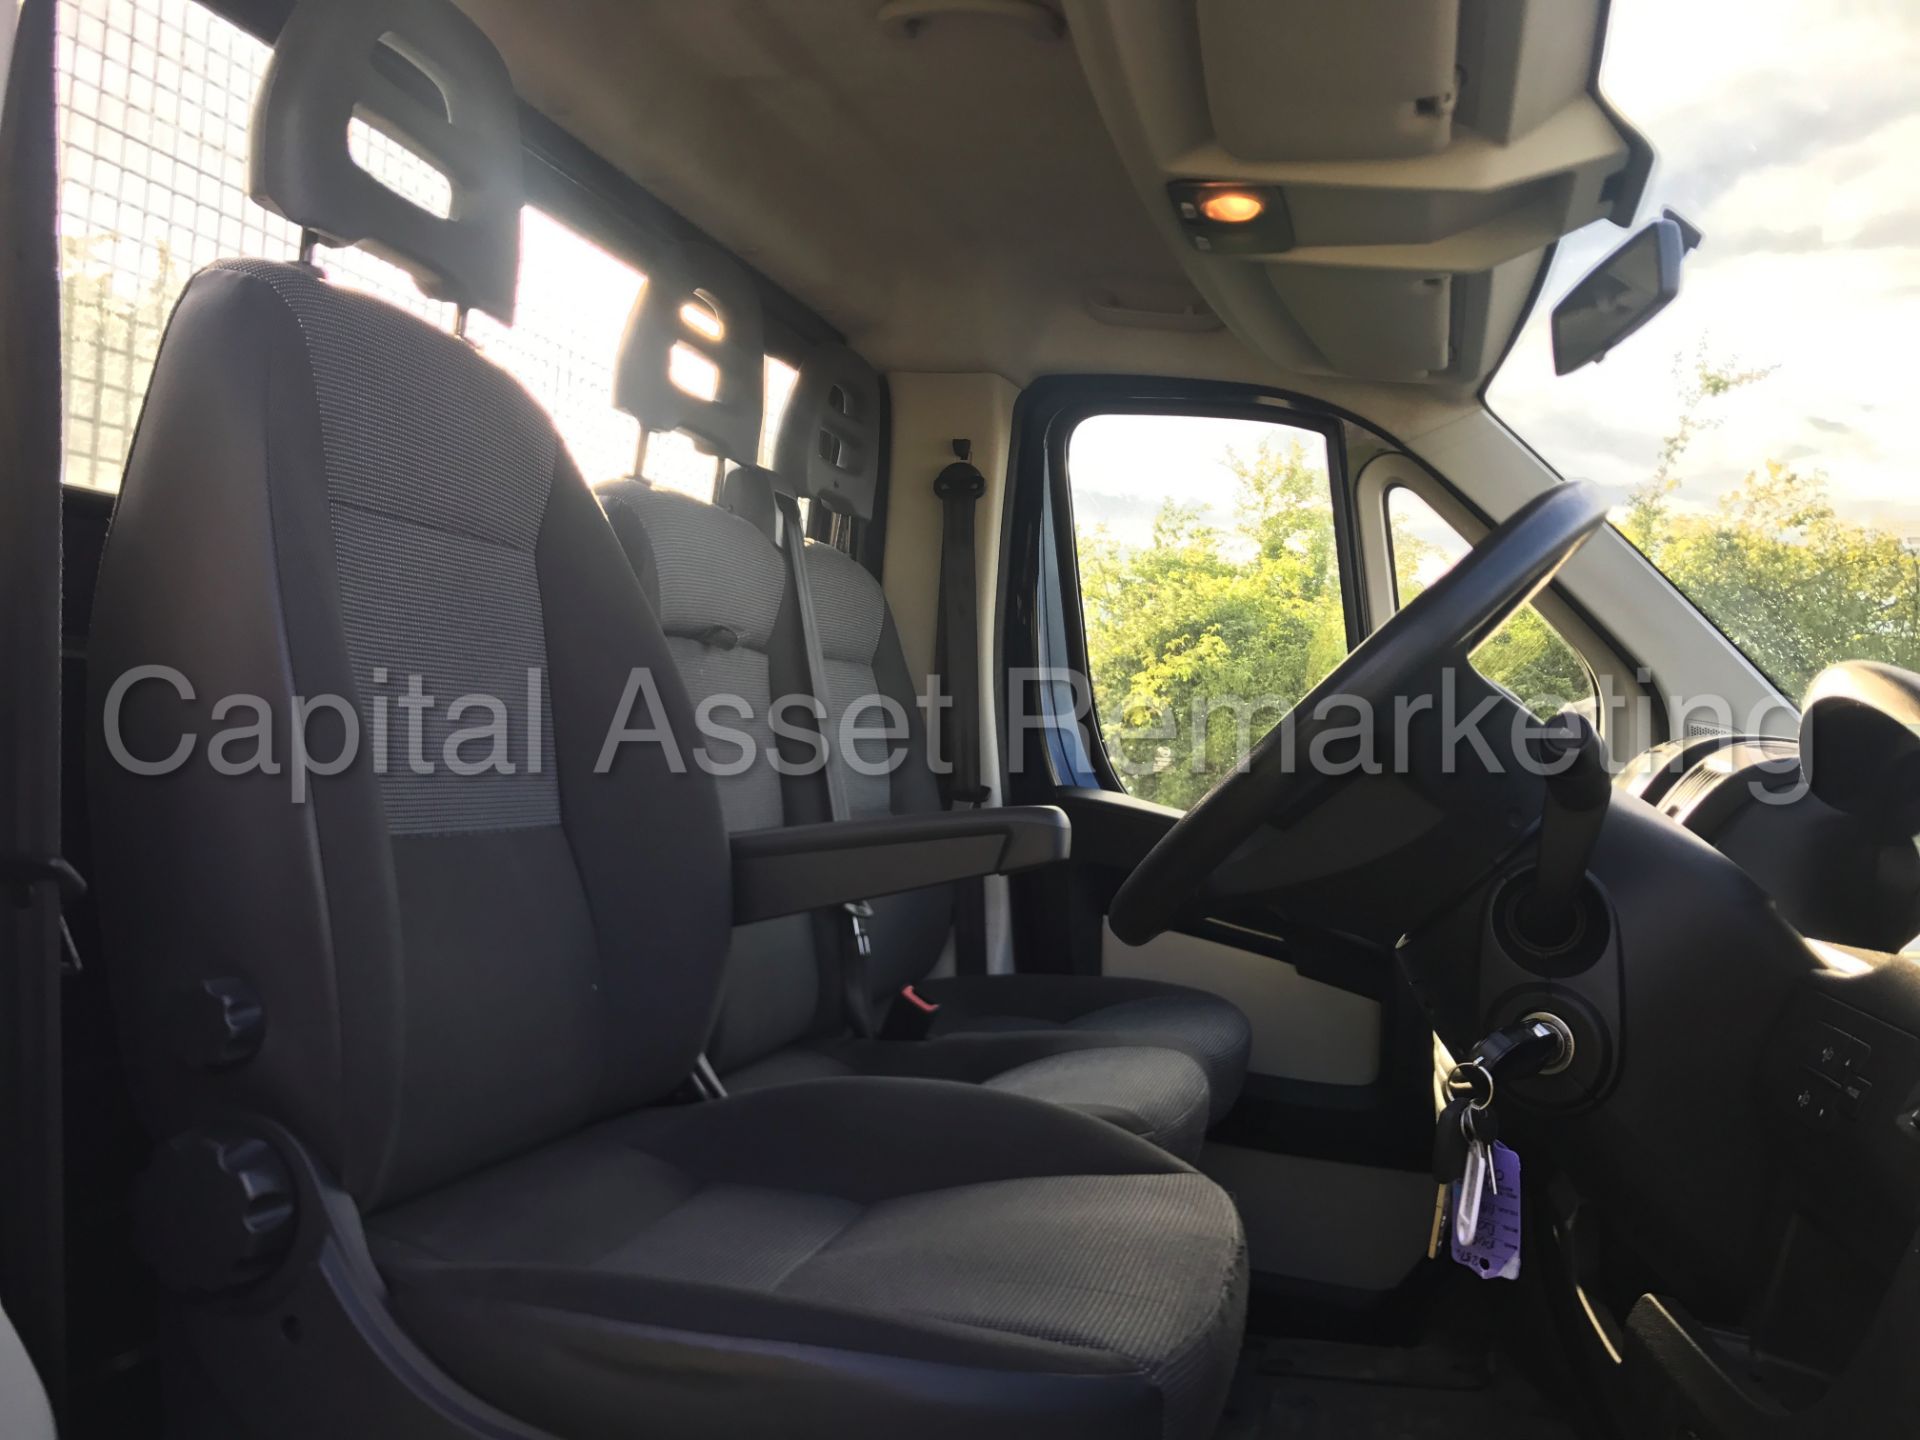 PEUGEOT BOXER 'L3 LWB - 13 FT FLATBED' (2014 MODEL) 2.2 HDI - 130 BHP - 6 SPEED' (1 COMPANY OWNER) - Image 18 of 21